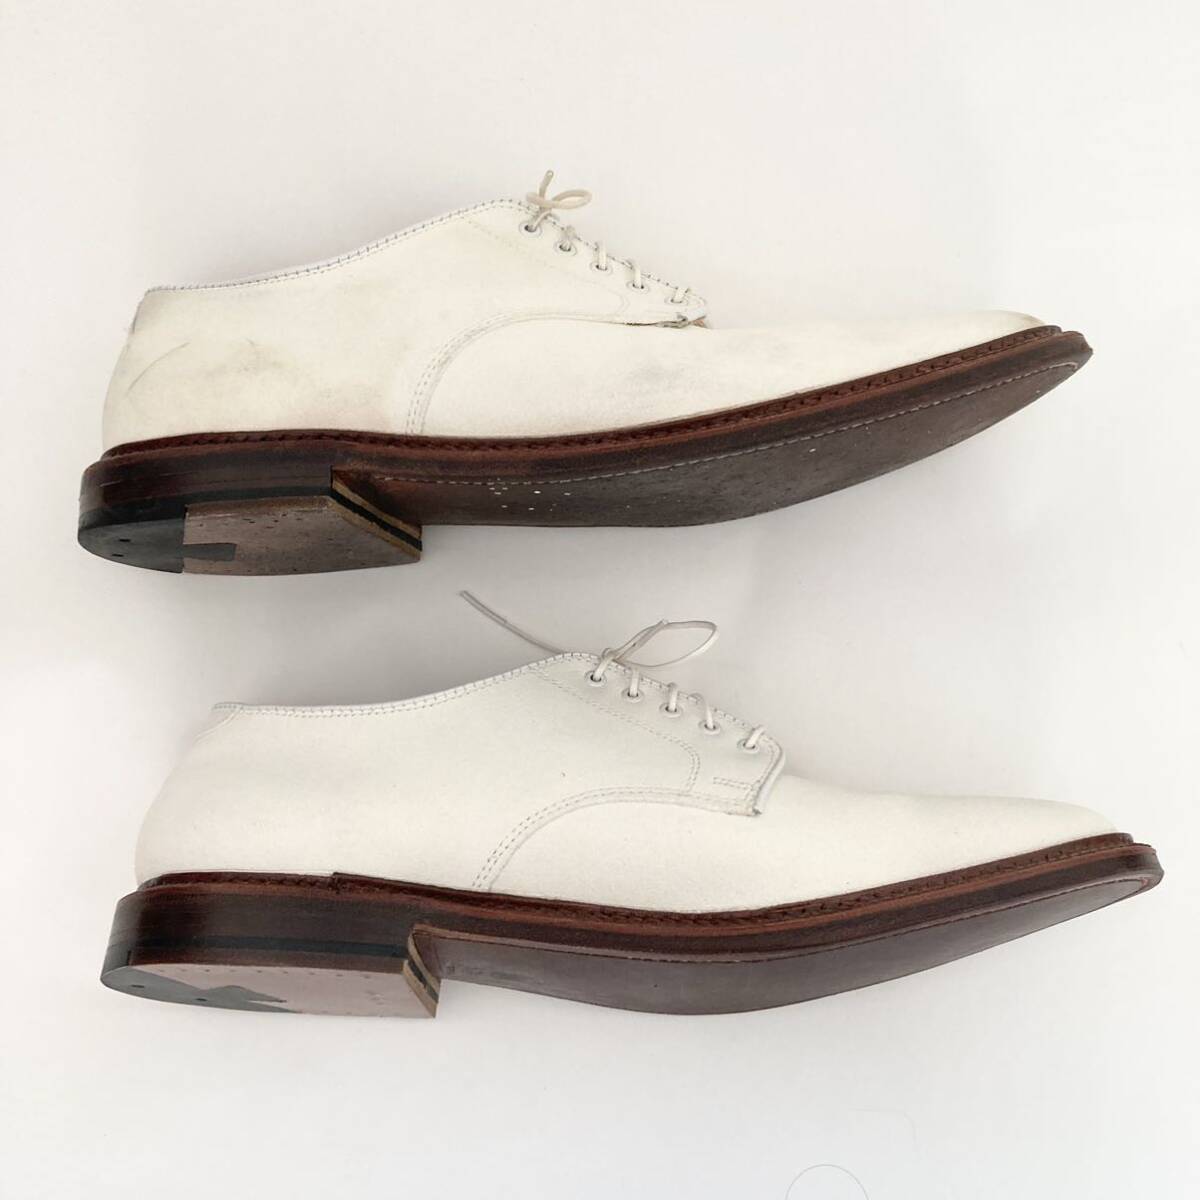  super-rare beautiful used *ALDEN / J.CREW* collaboration 4060 White Alden J Crew suede leather dress shoes white US11 leather shoes 29cm